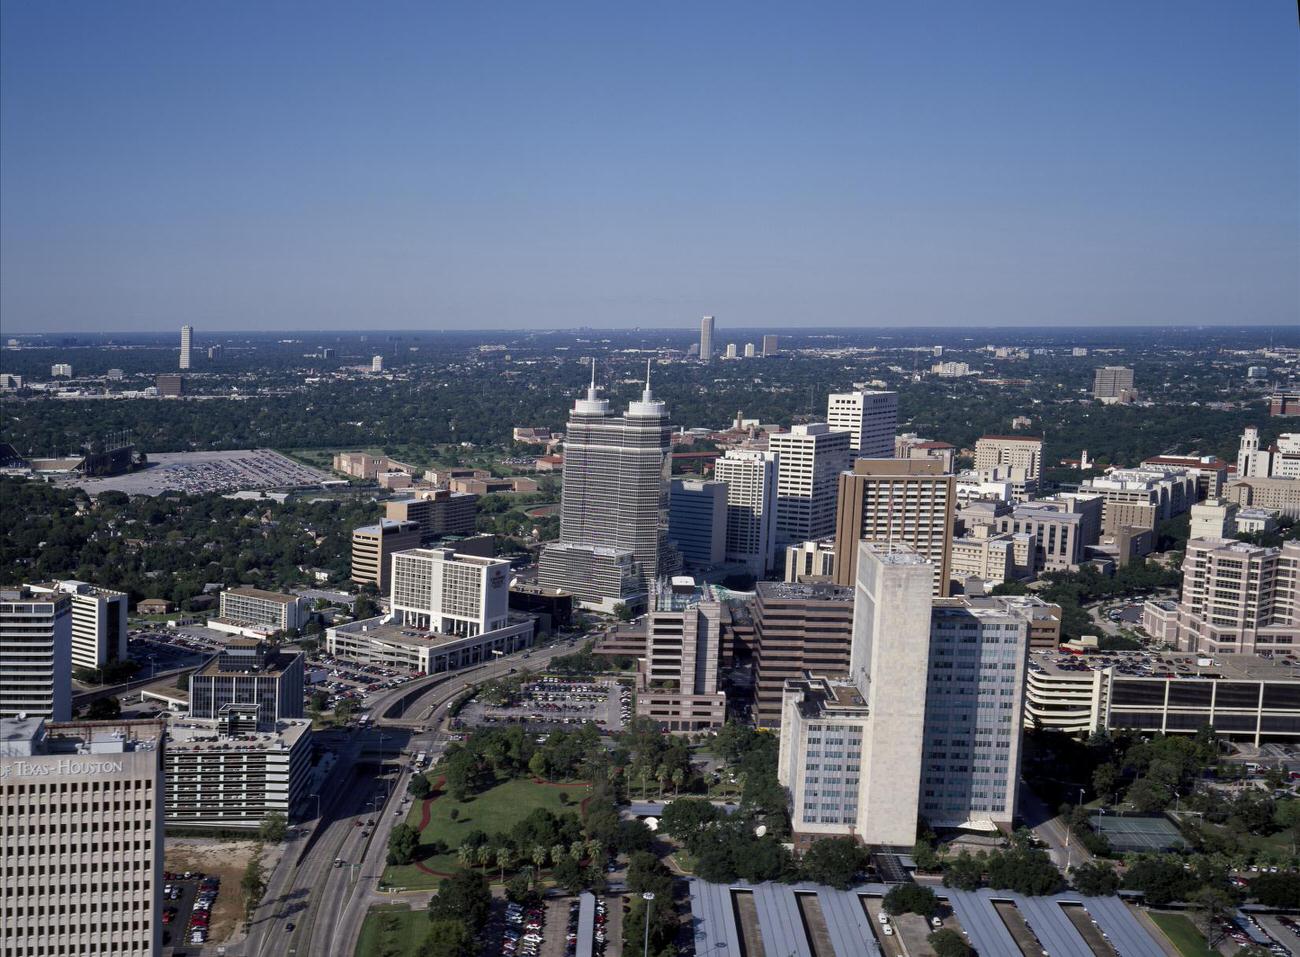 Aerial view of Houston, Texas, above its famous Medical Center, 1990s